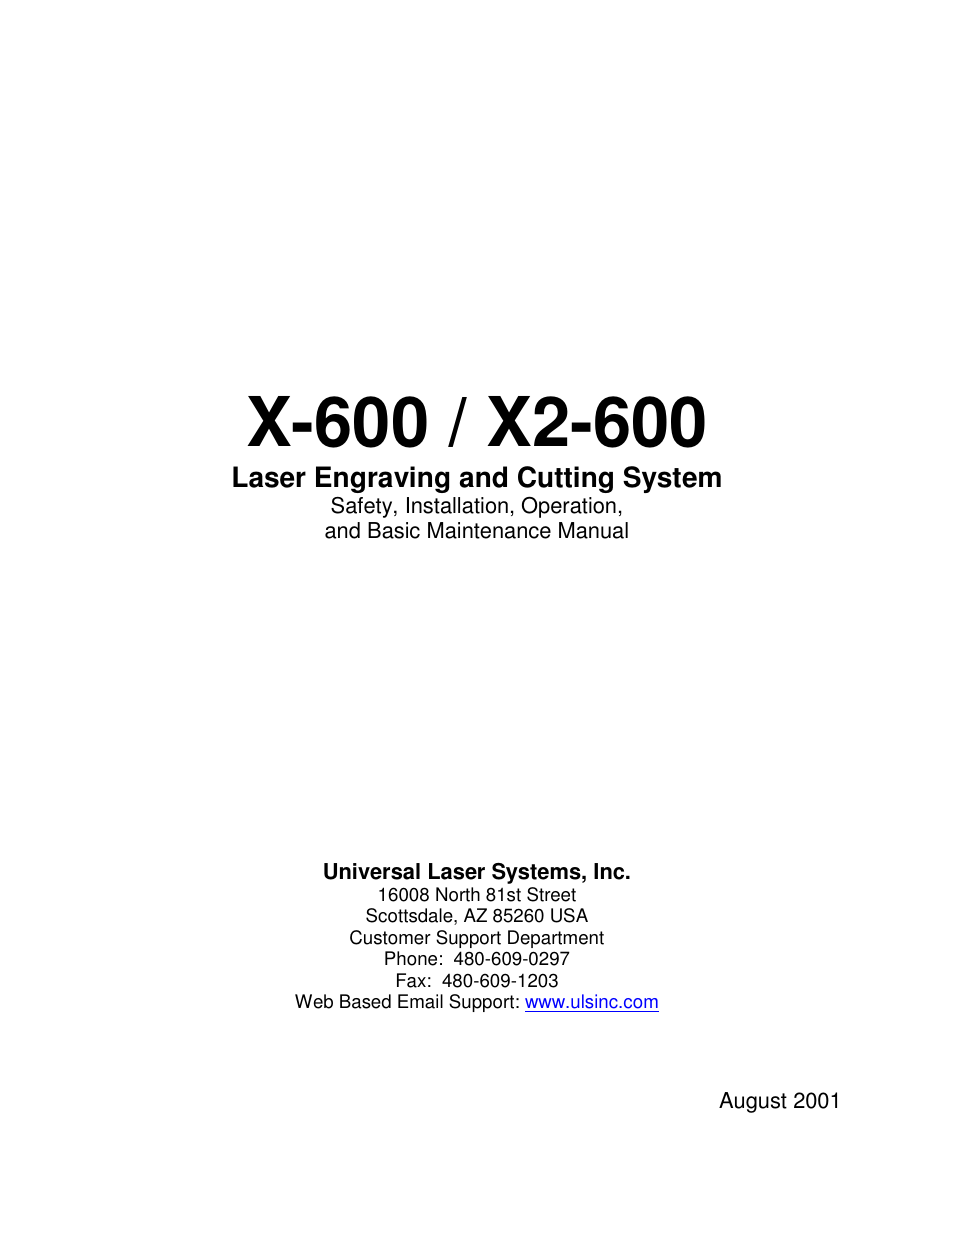 Universal Laser Systems X2-600 User Manual | 121 pages